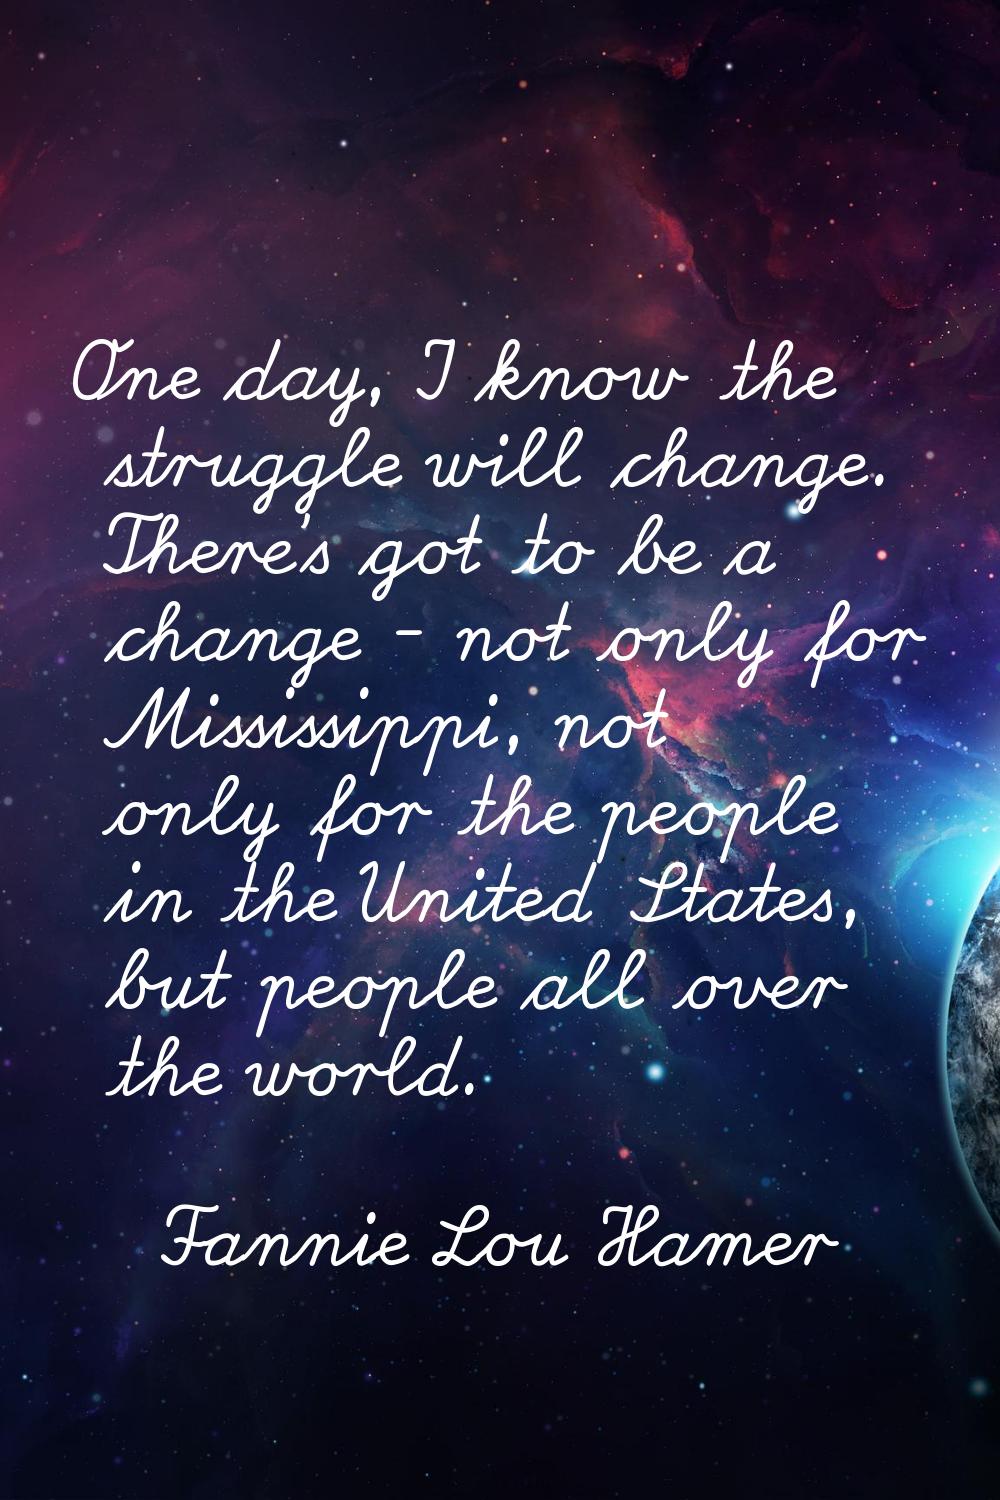 One day, I know the struggle will change. There's got to be a change - not only for Mississippi, no